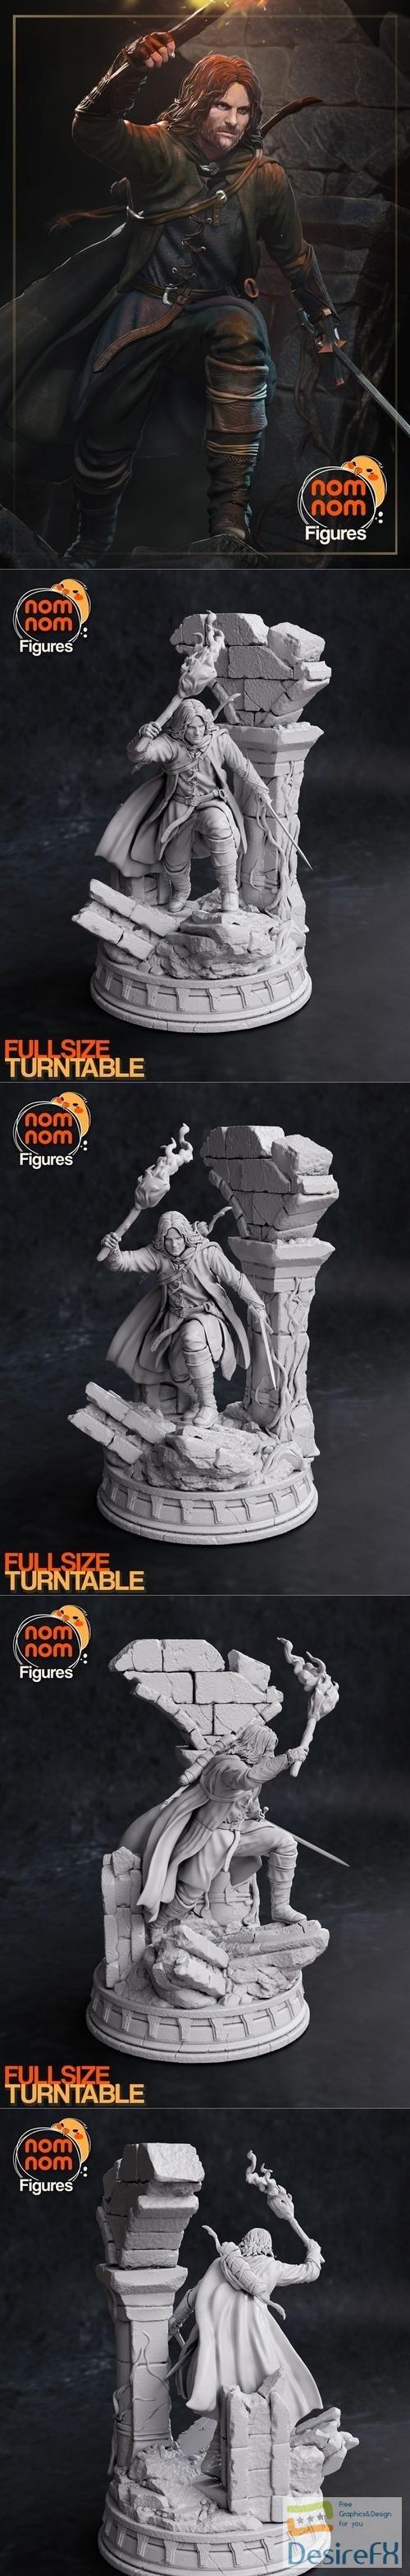 Aragorn - Lord of the Rings - NomNom Figures 3D Print